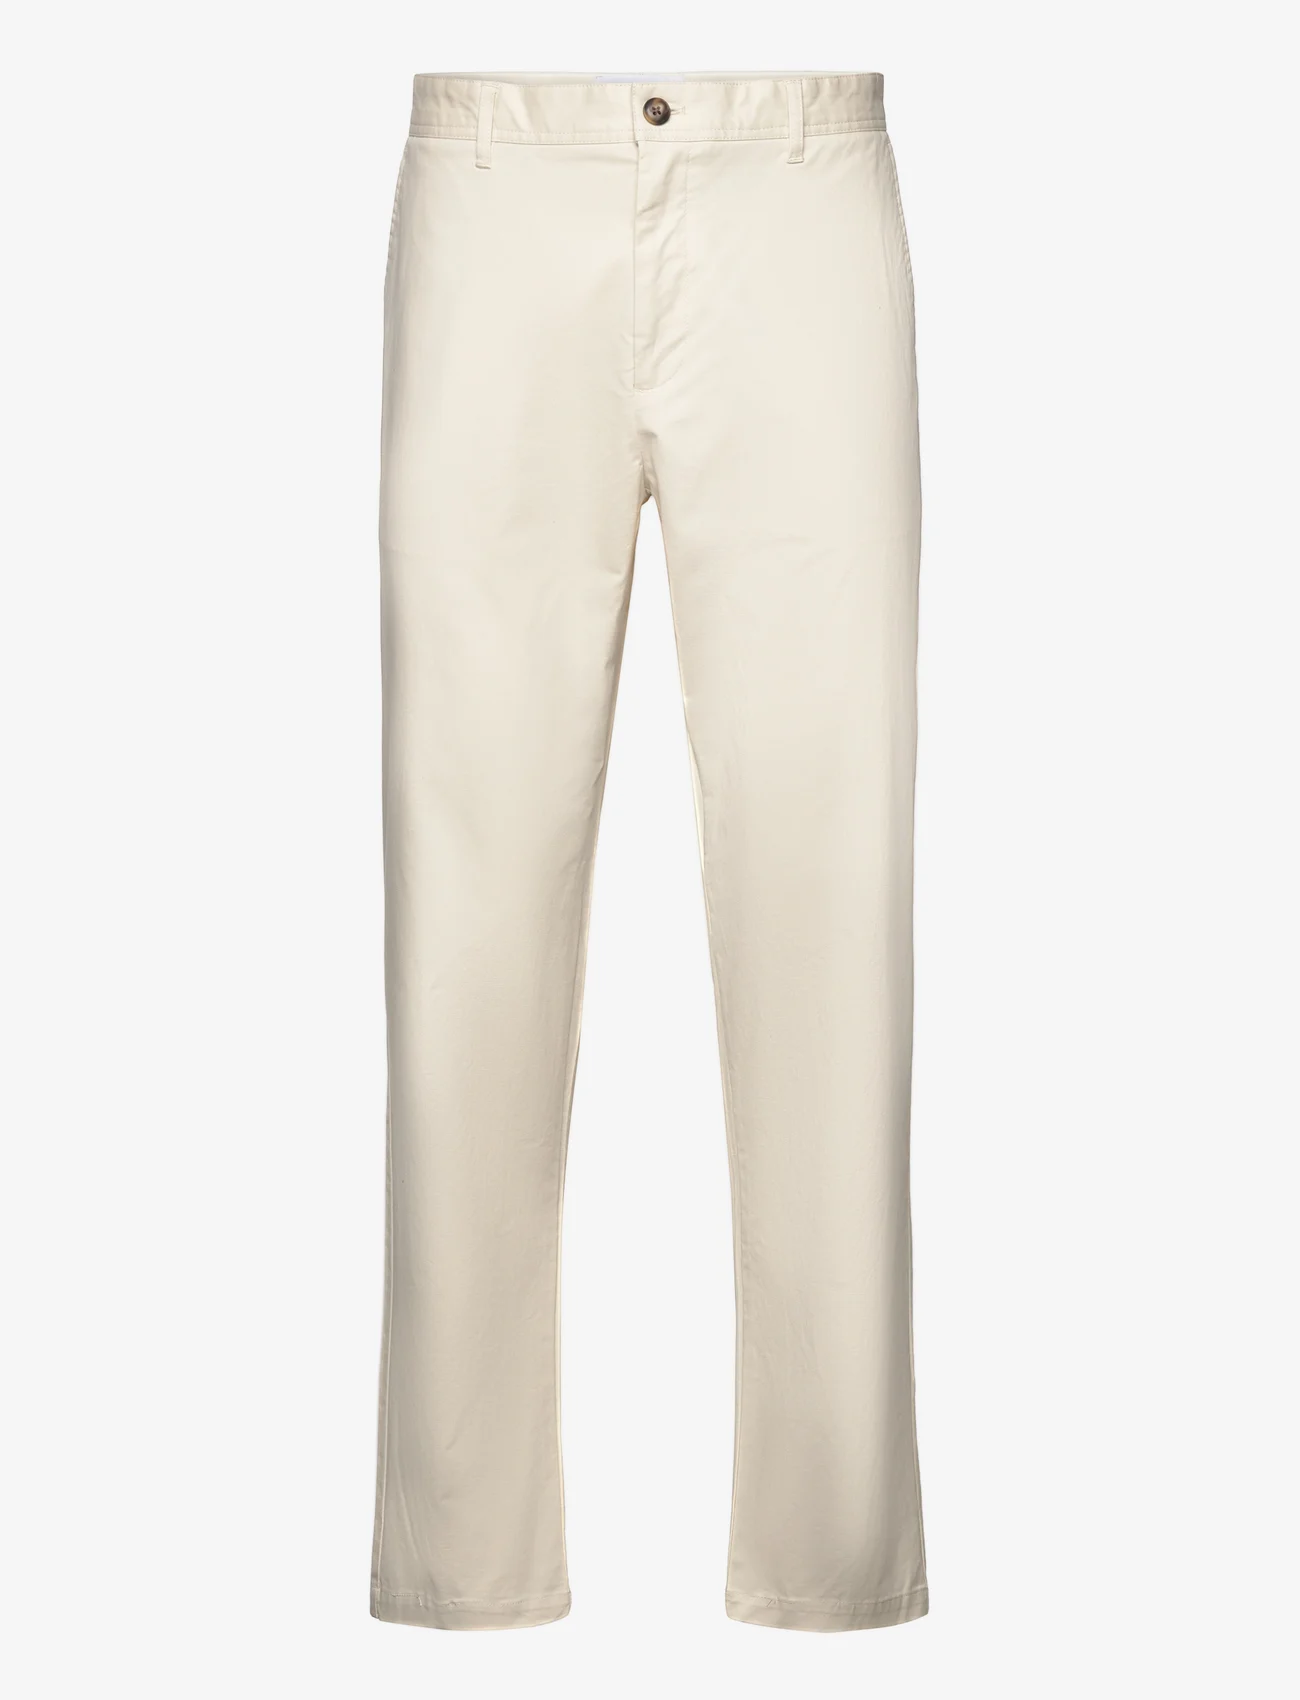 Les Deux - Jared Twill Chino Pants - chino's - ivory - 0